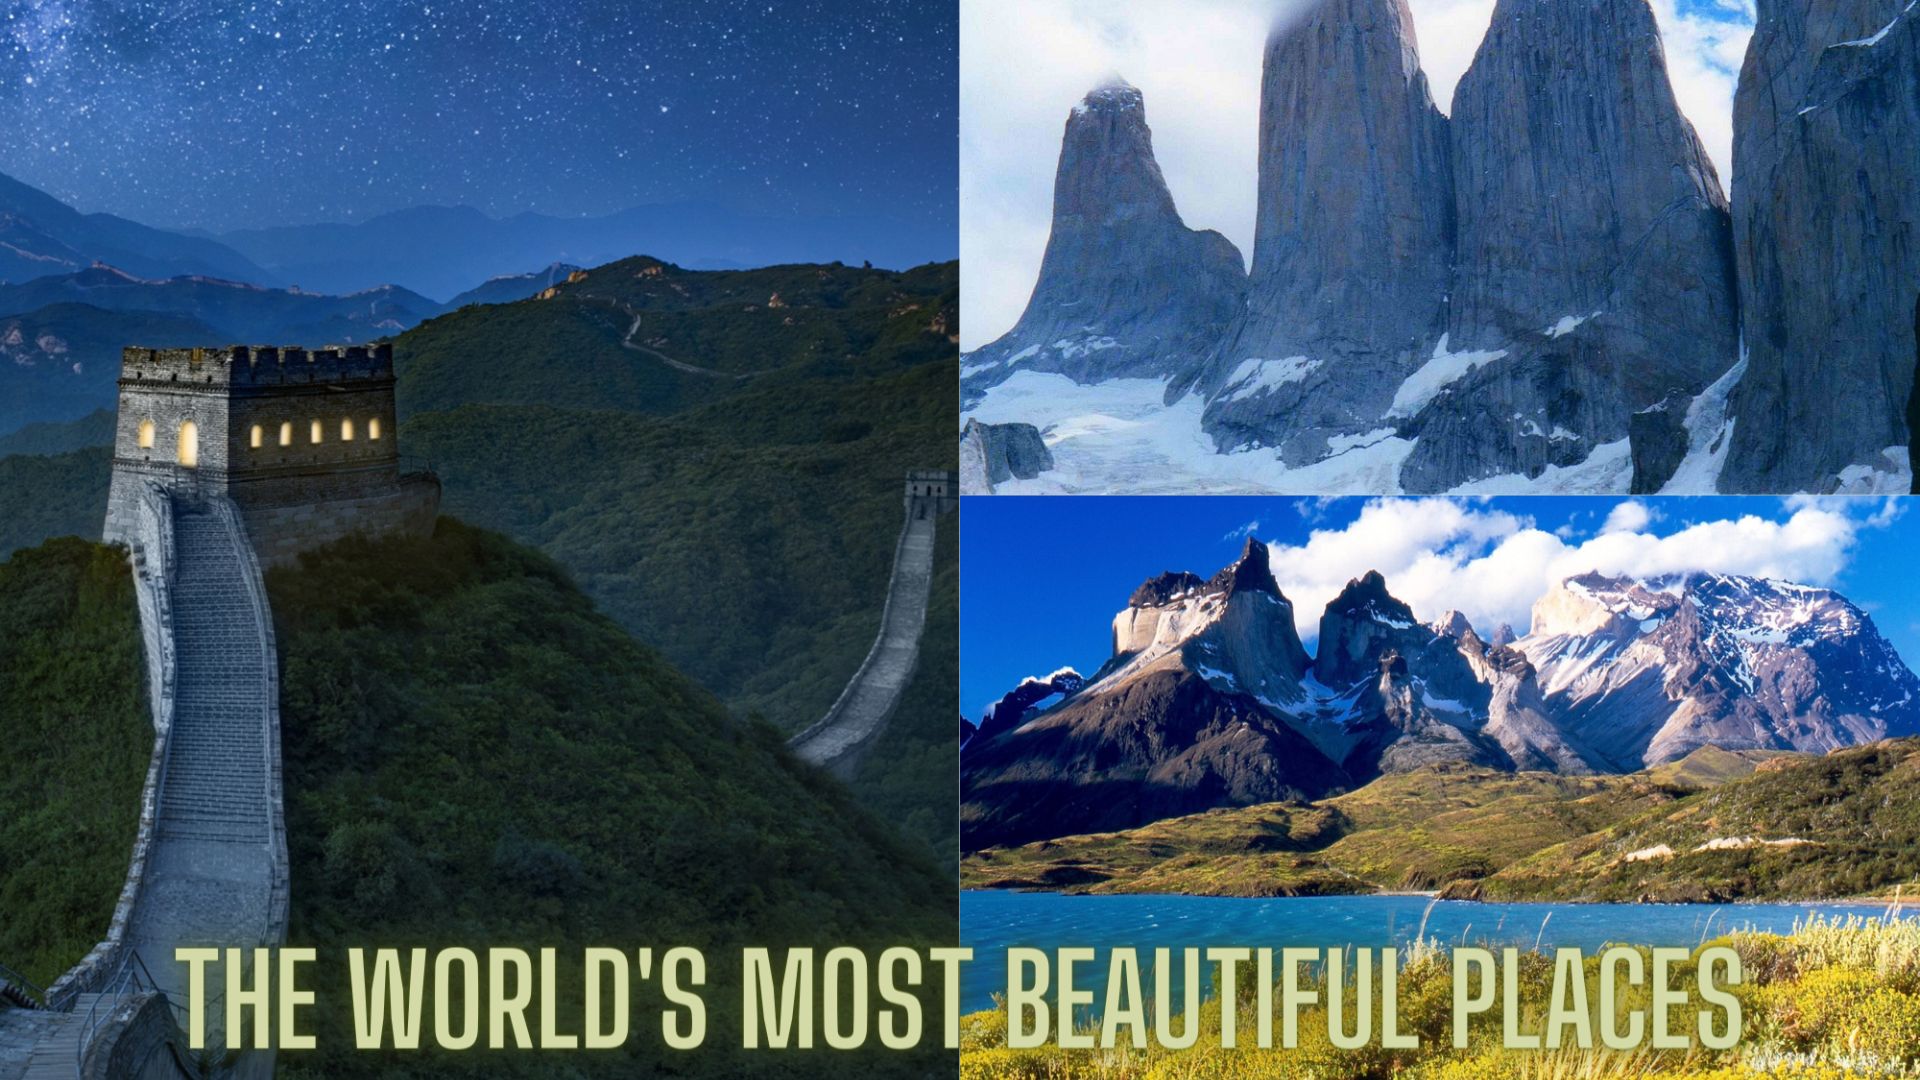 The World's Most Beautiful places